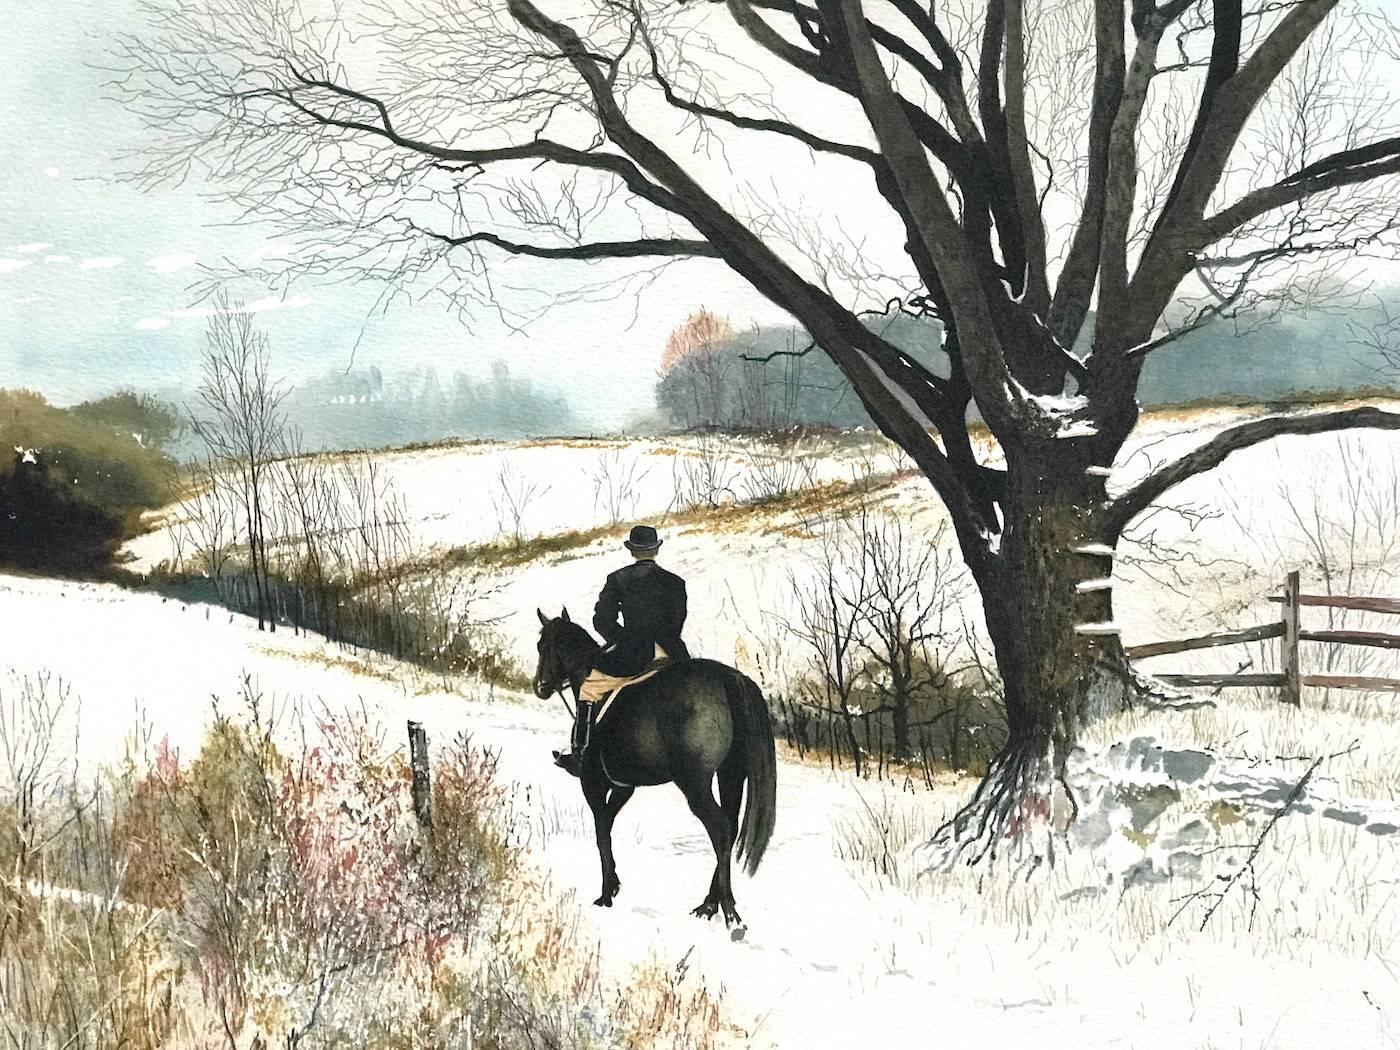 Hilltopper, Signed Limited Edition Lithograph, Equestrian English Riding - Realist Print by Peter Sculthorpe